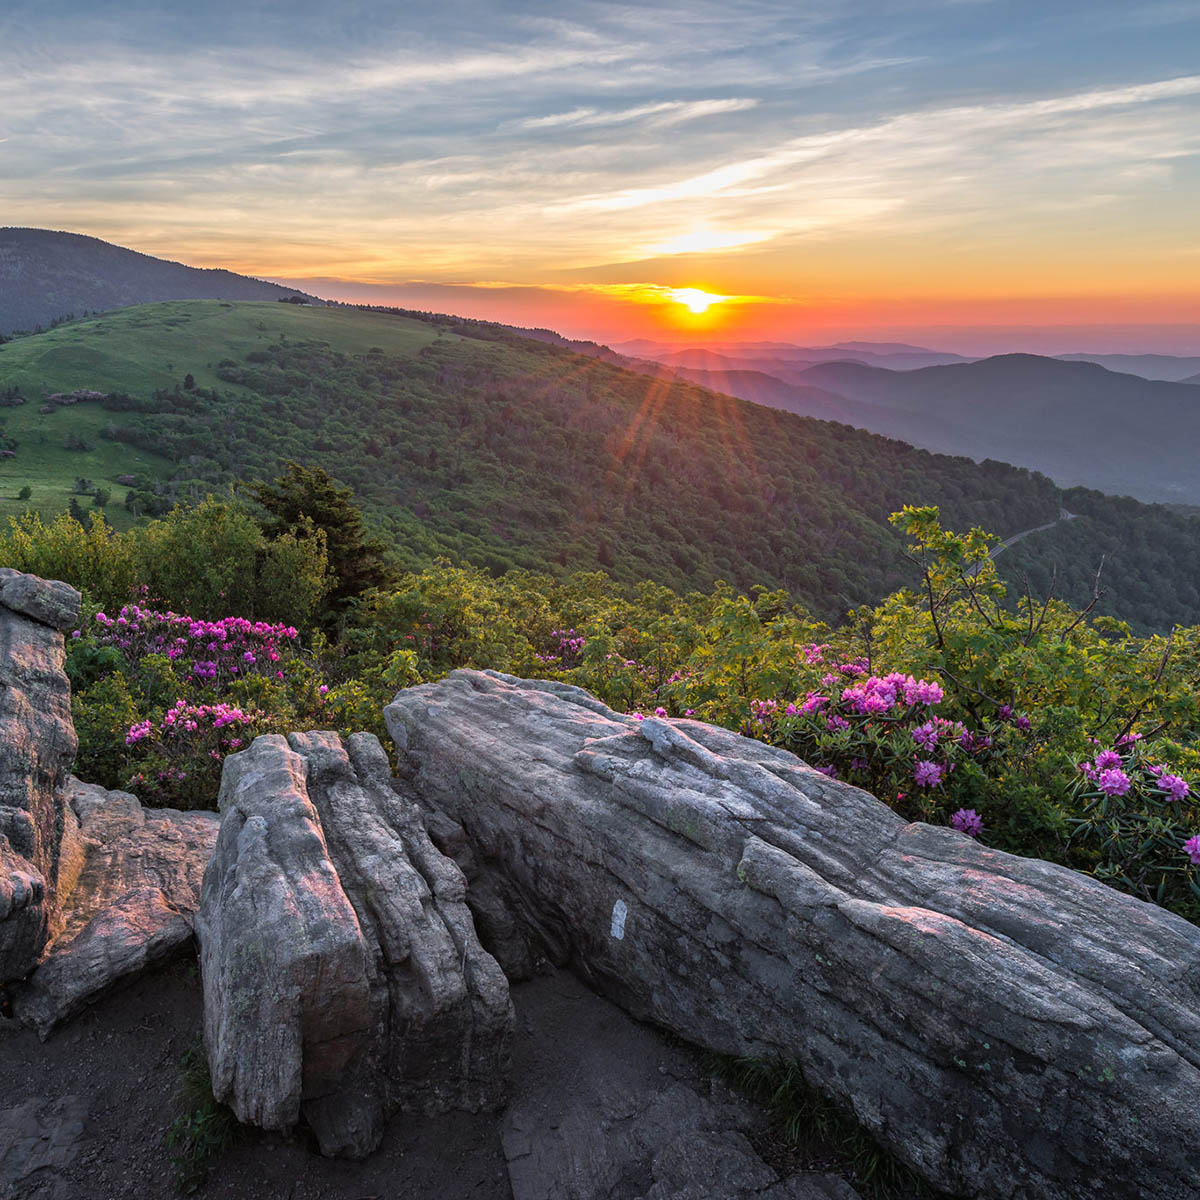 Photo of a beautiful sunrise over a mountain with flowers in the foreground